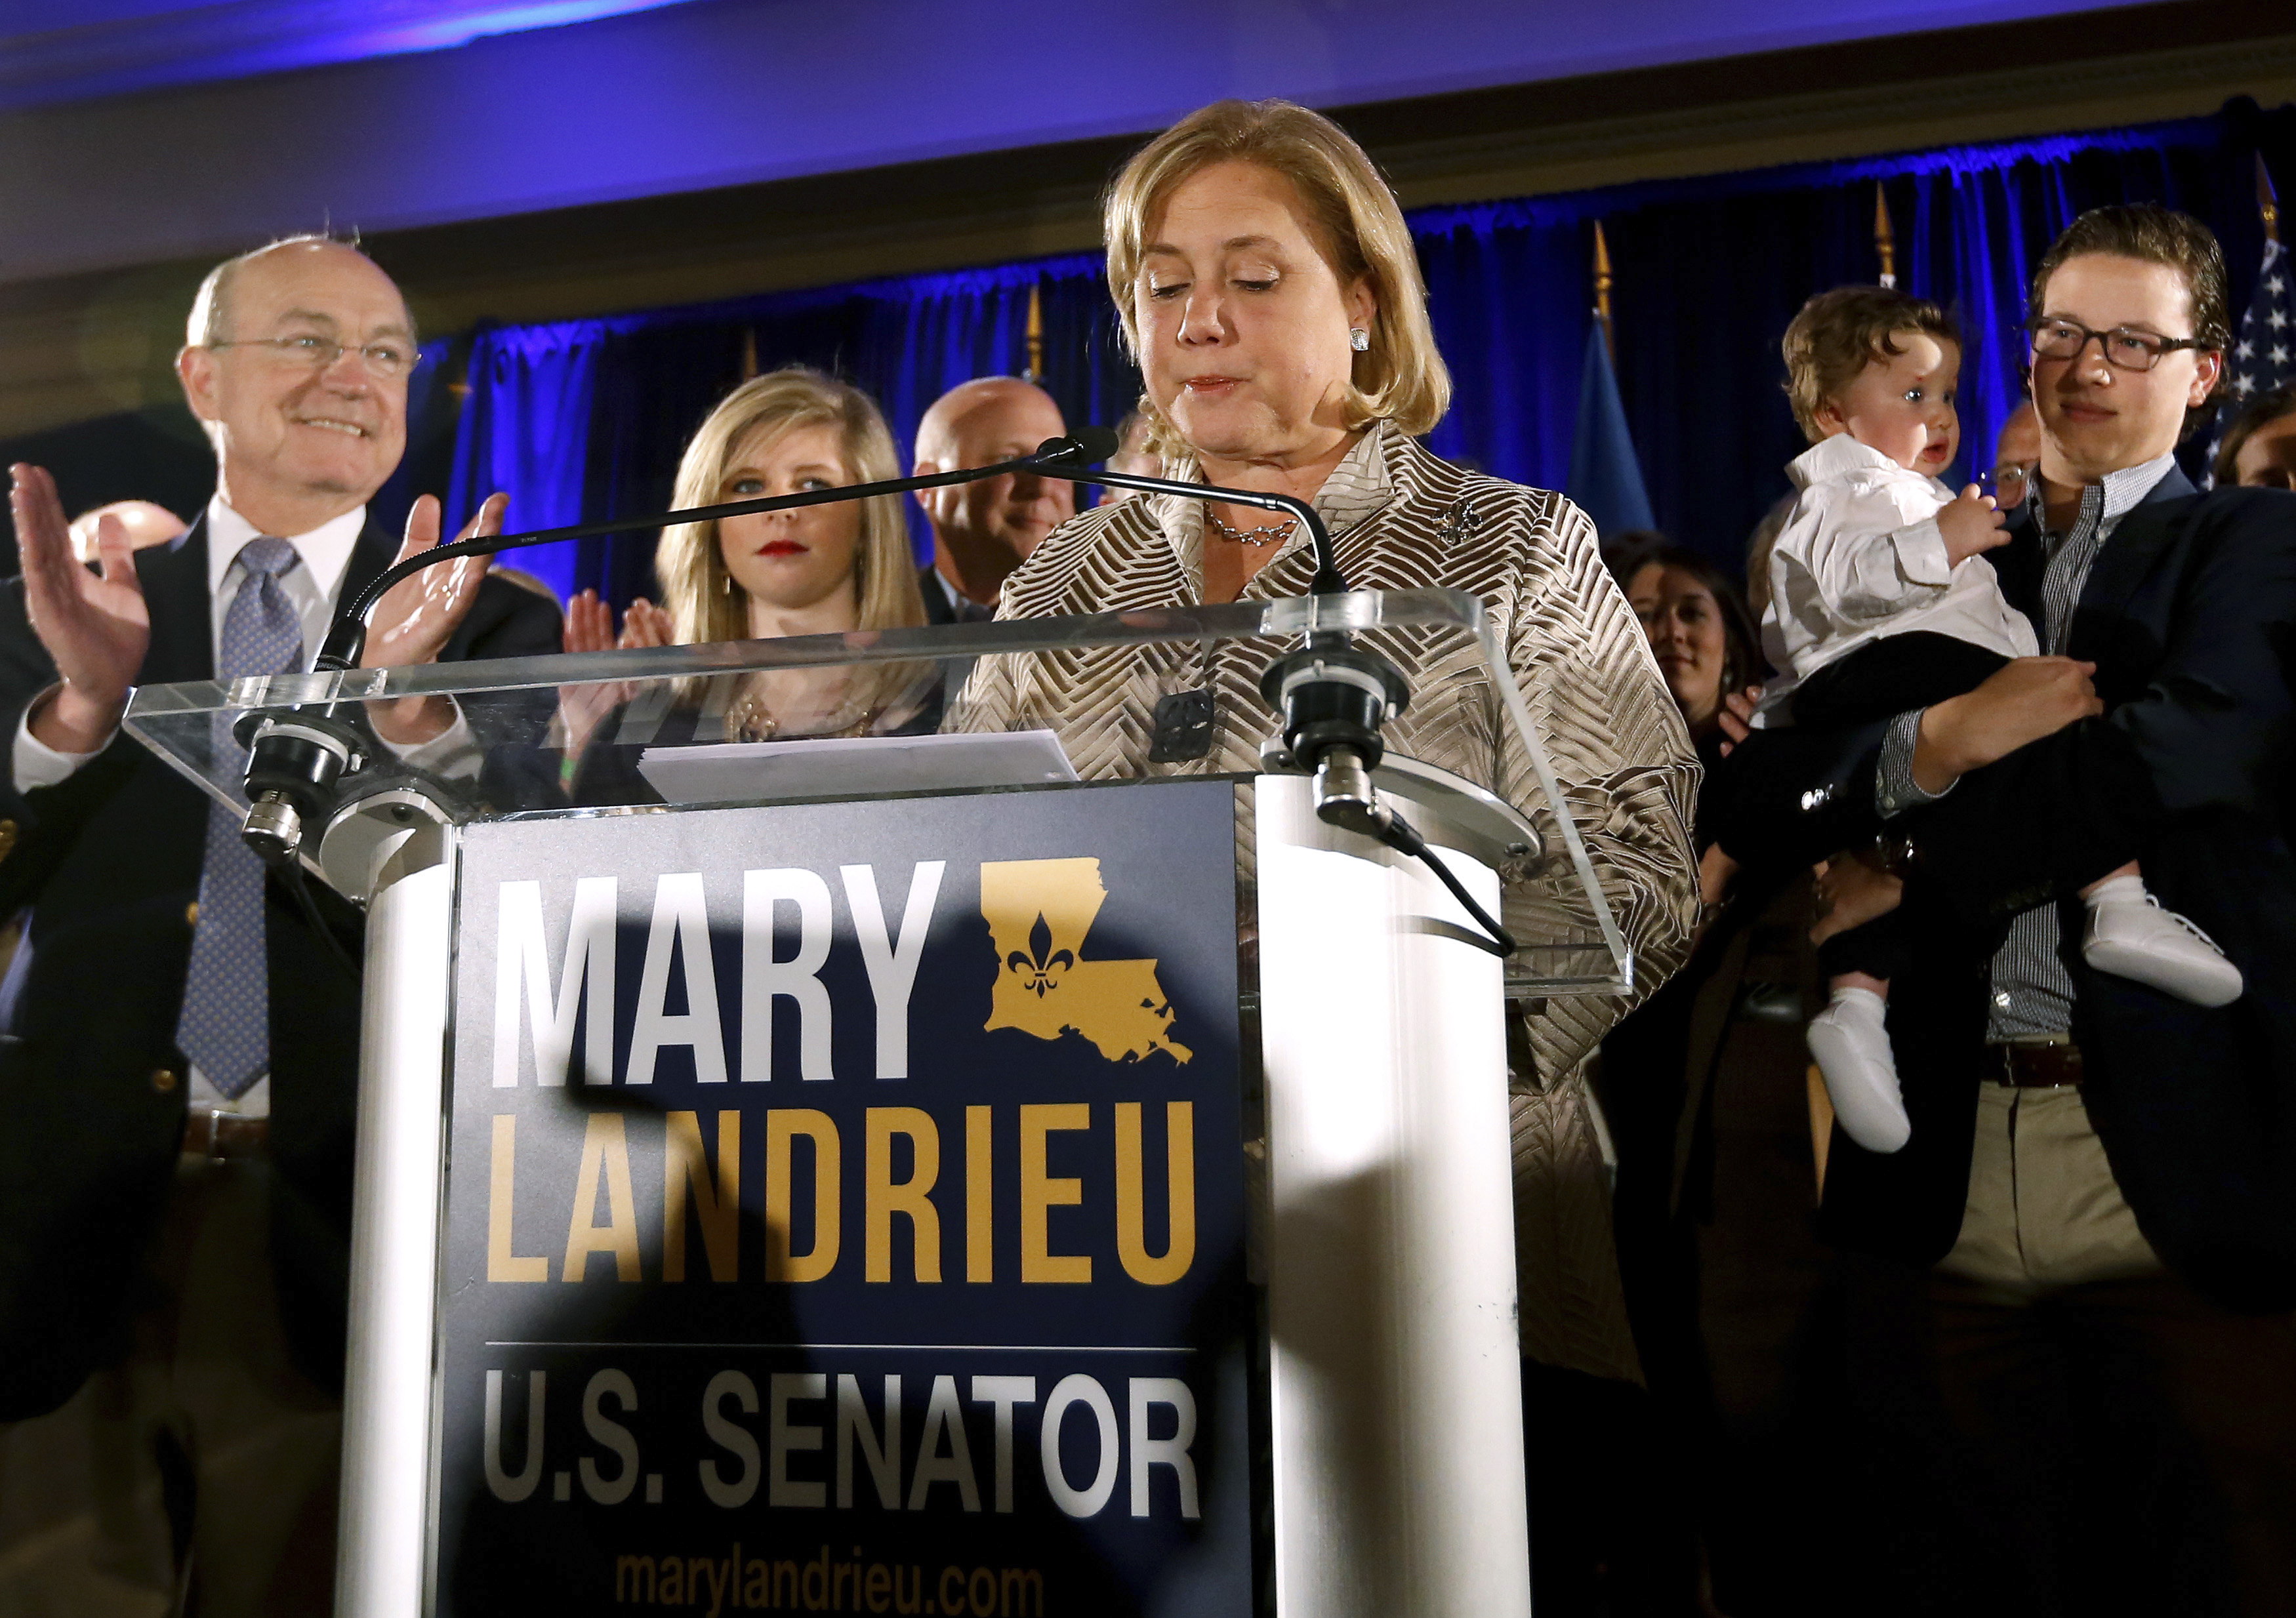 Democratic Senator Mary Landrieu delivers a concession speech after the results of the U.S. Senate race in New Orleans on Dec. 6, 2014. (Jonathan Bachman—Reuters)